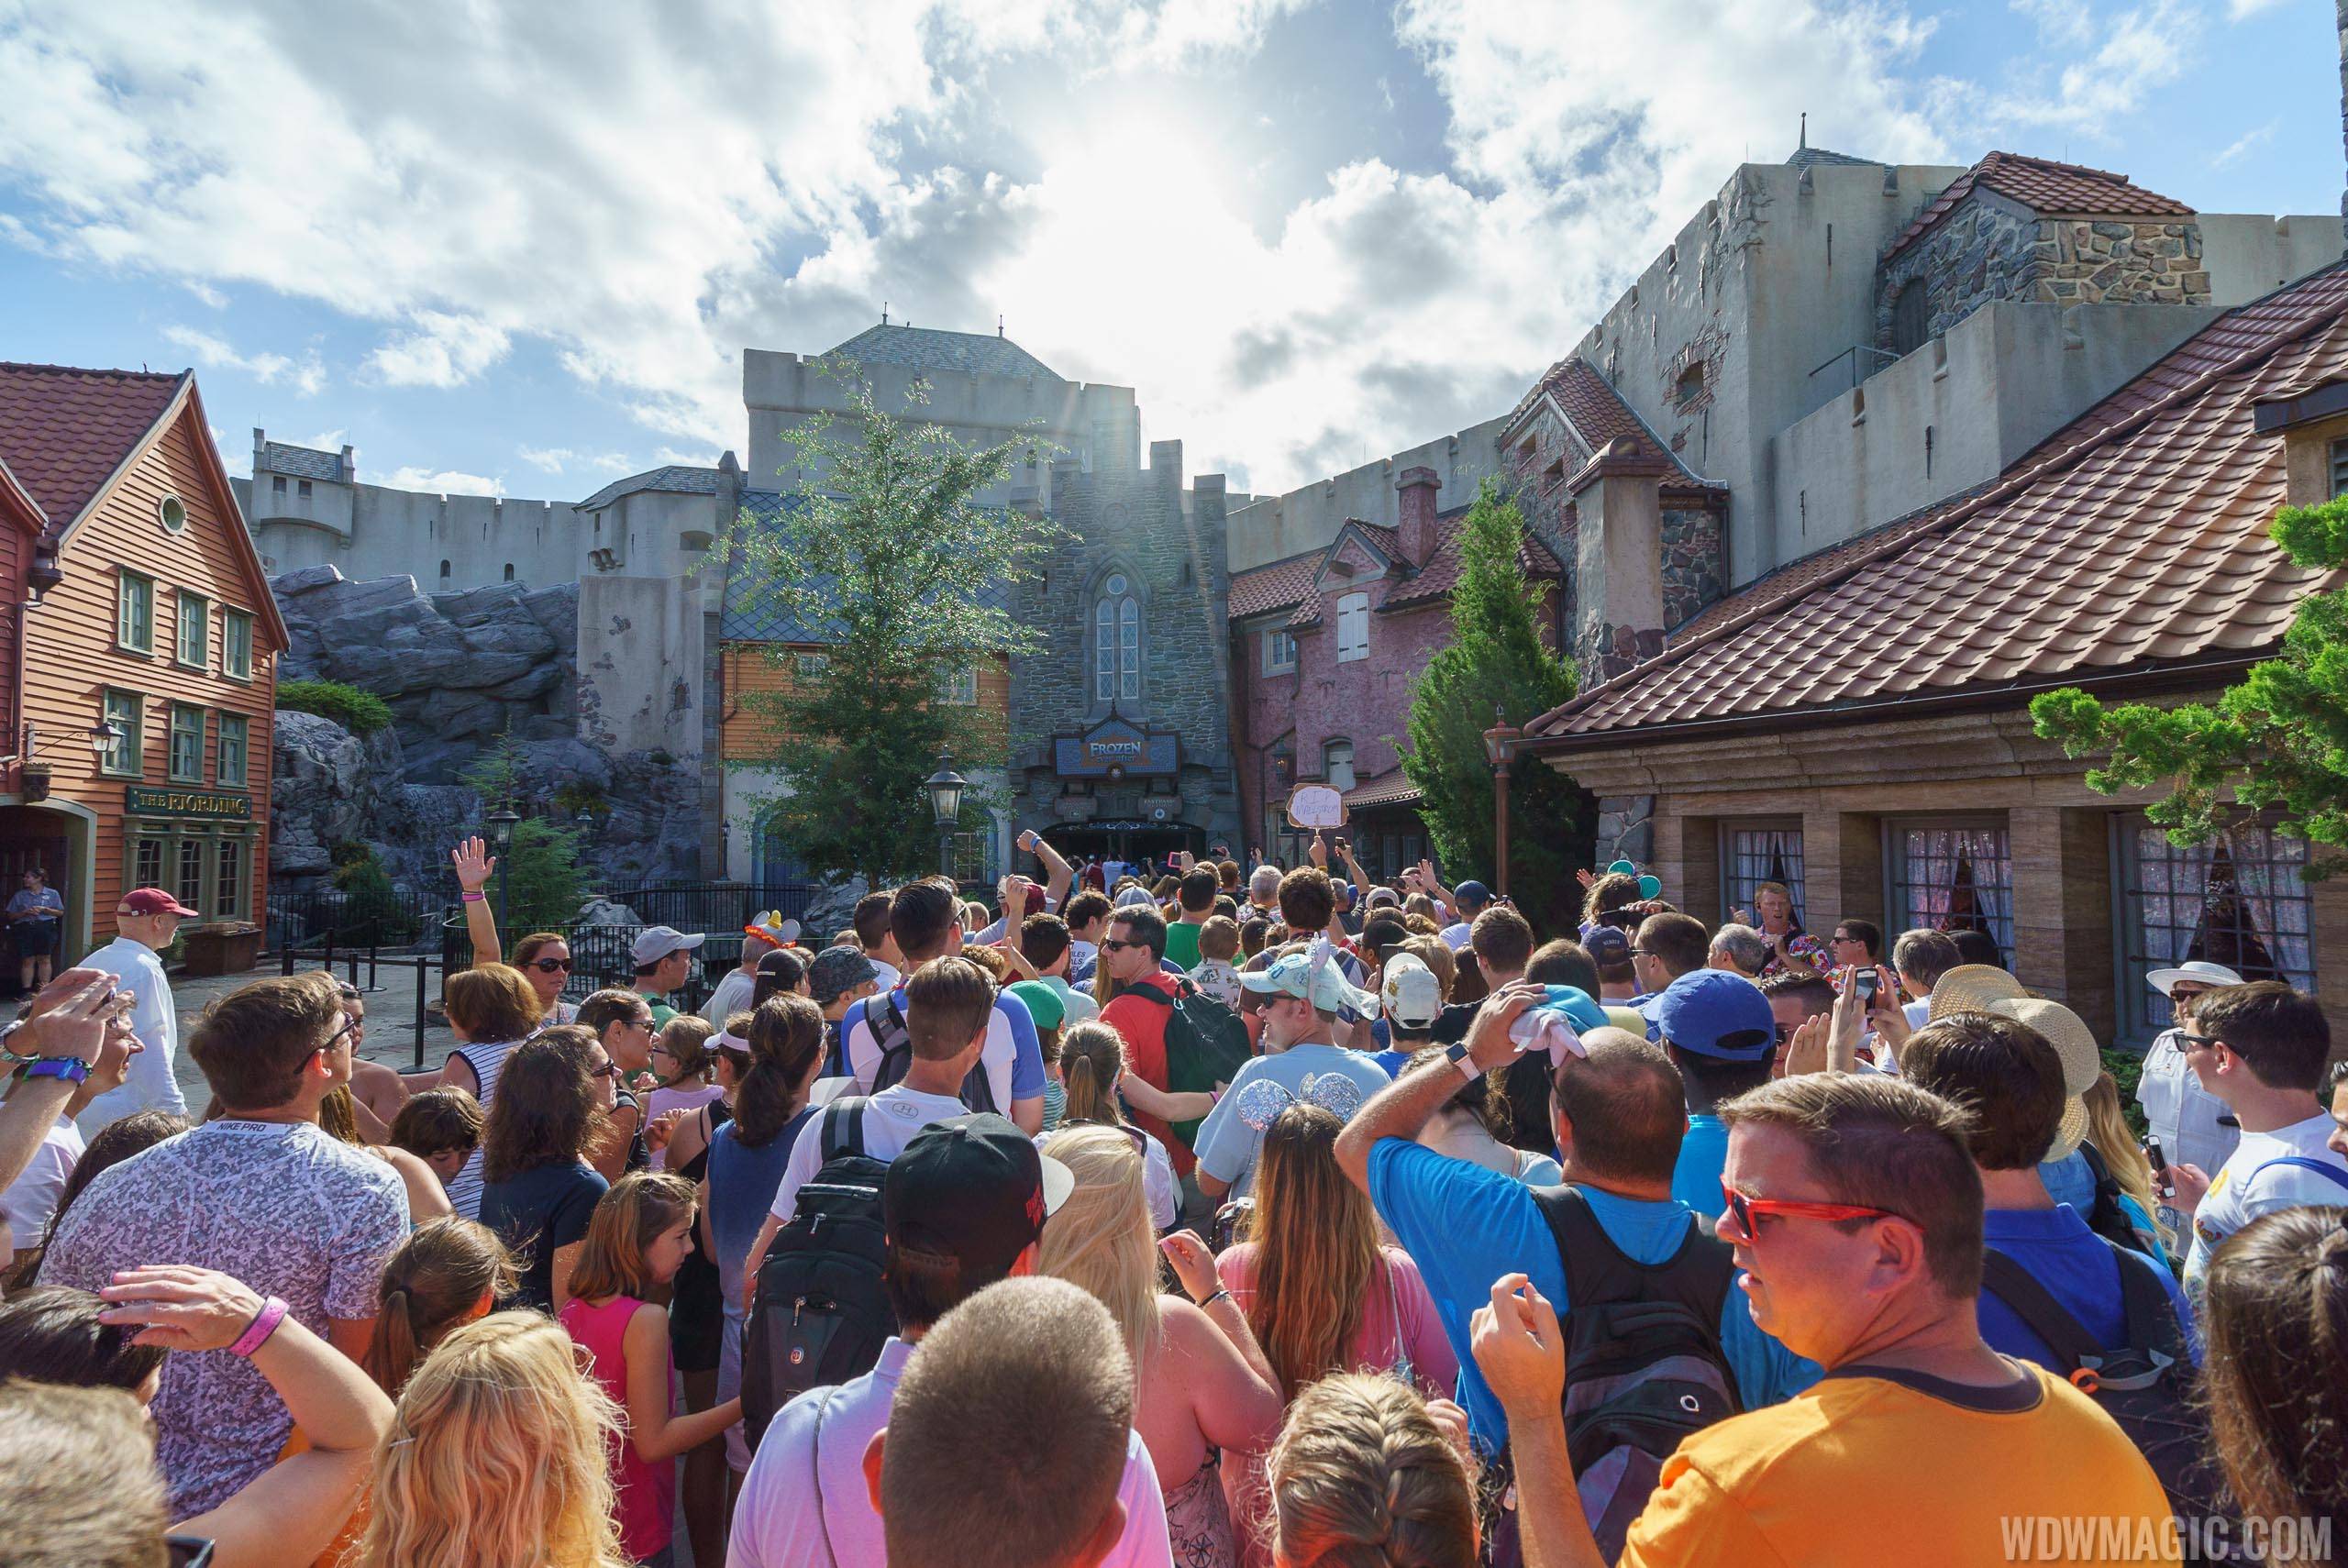 Guests pack the Norway Pavilion courtyard